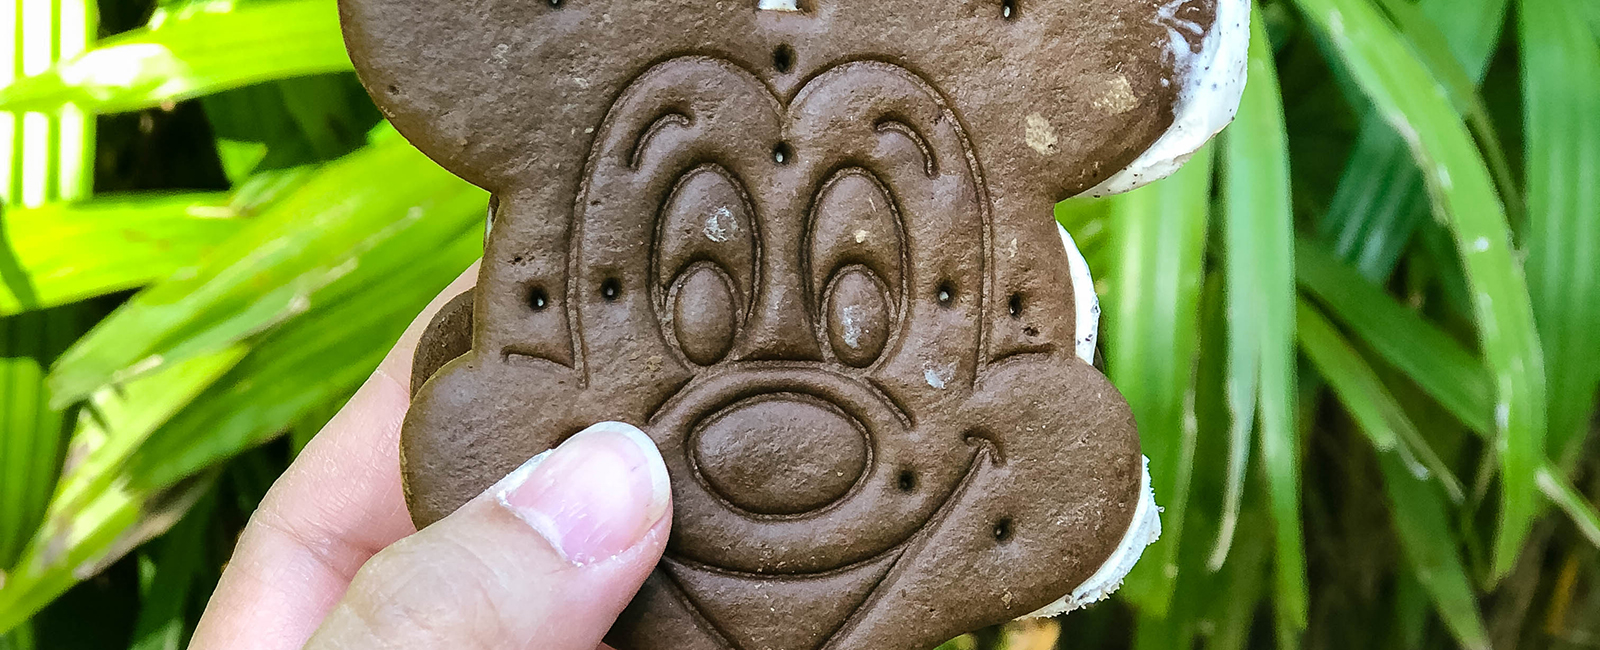 9 Must-Try Disney Foods on Your Next Disney Trip